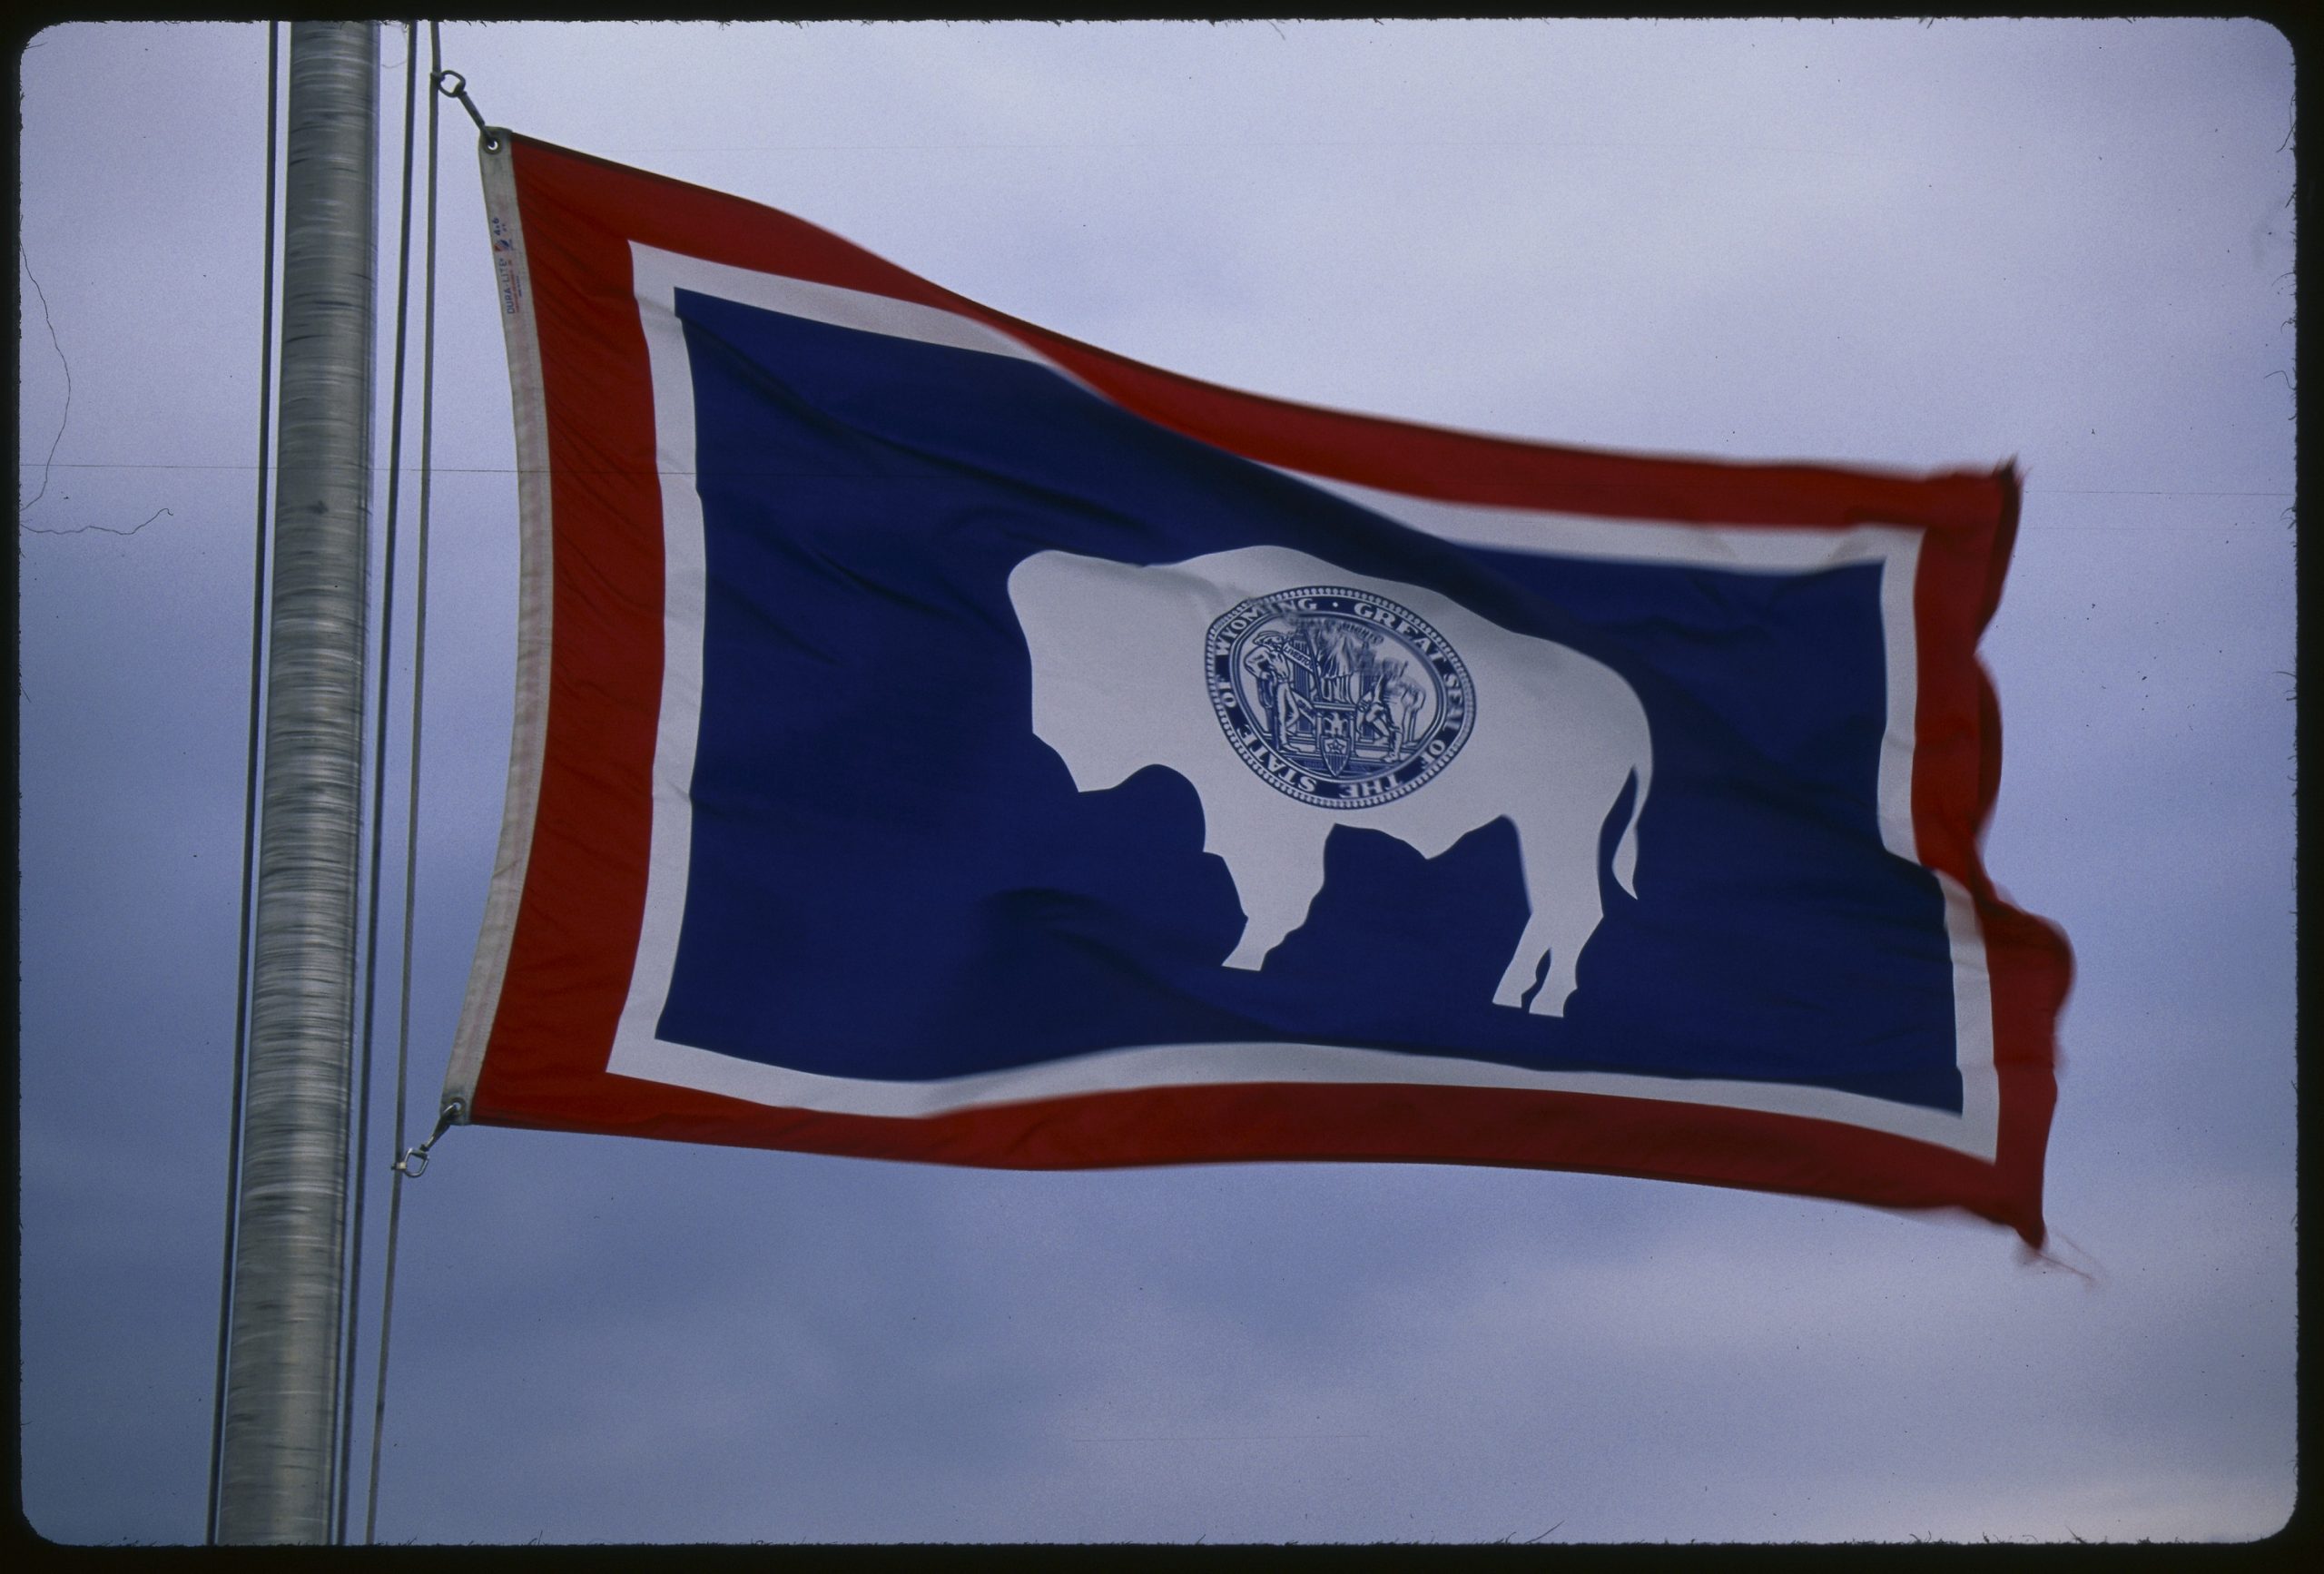 The state flag of Wyoming, featuring the state seal and a white buffalo